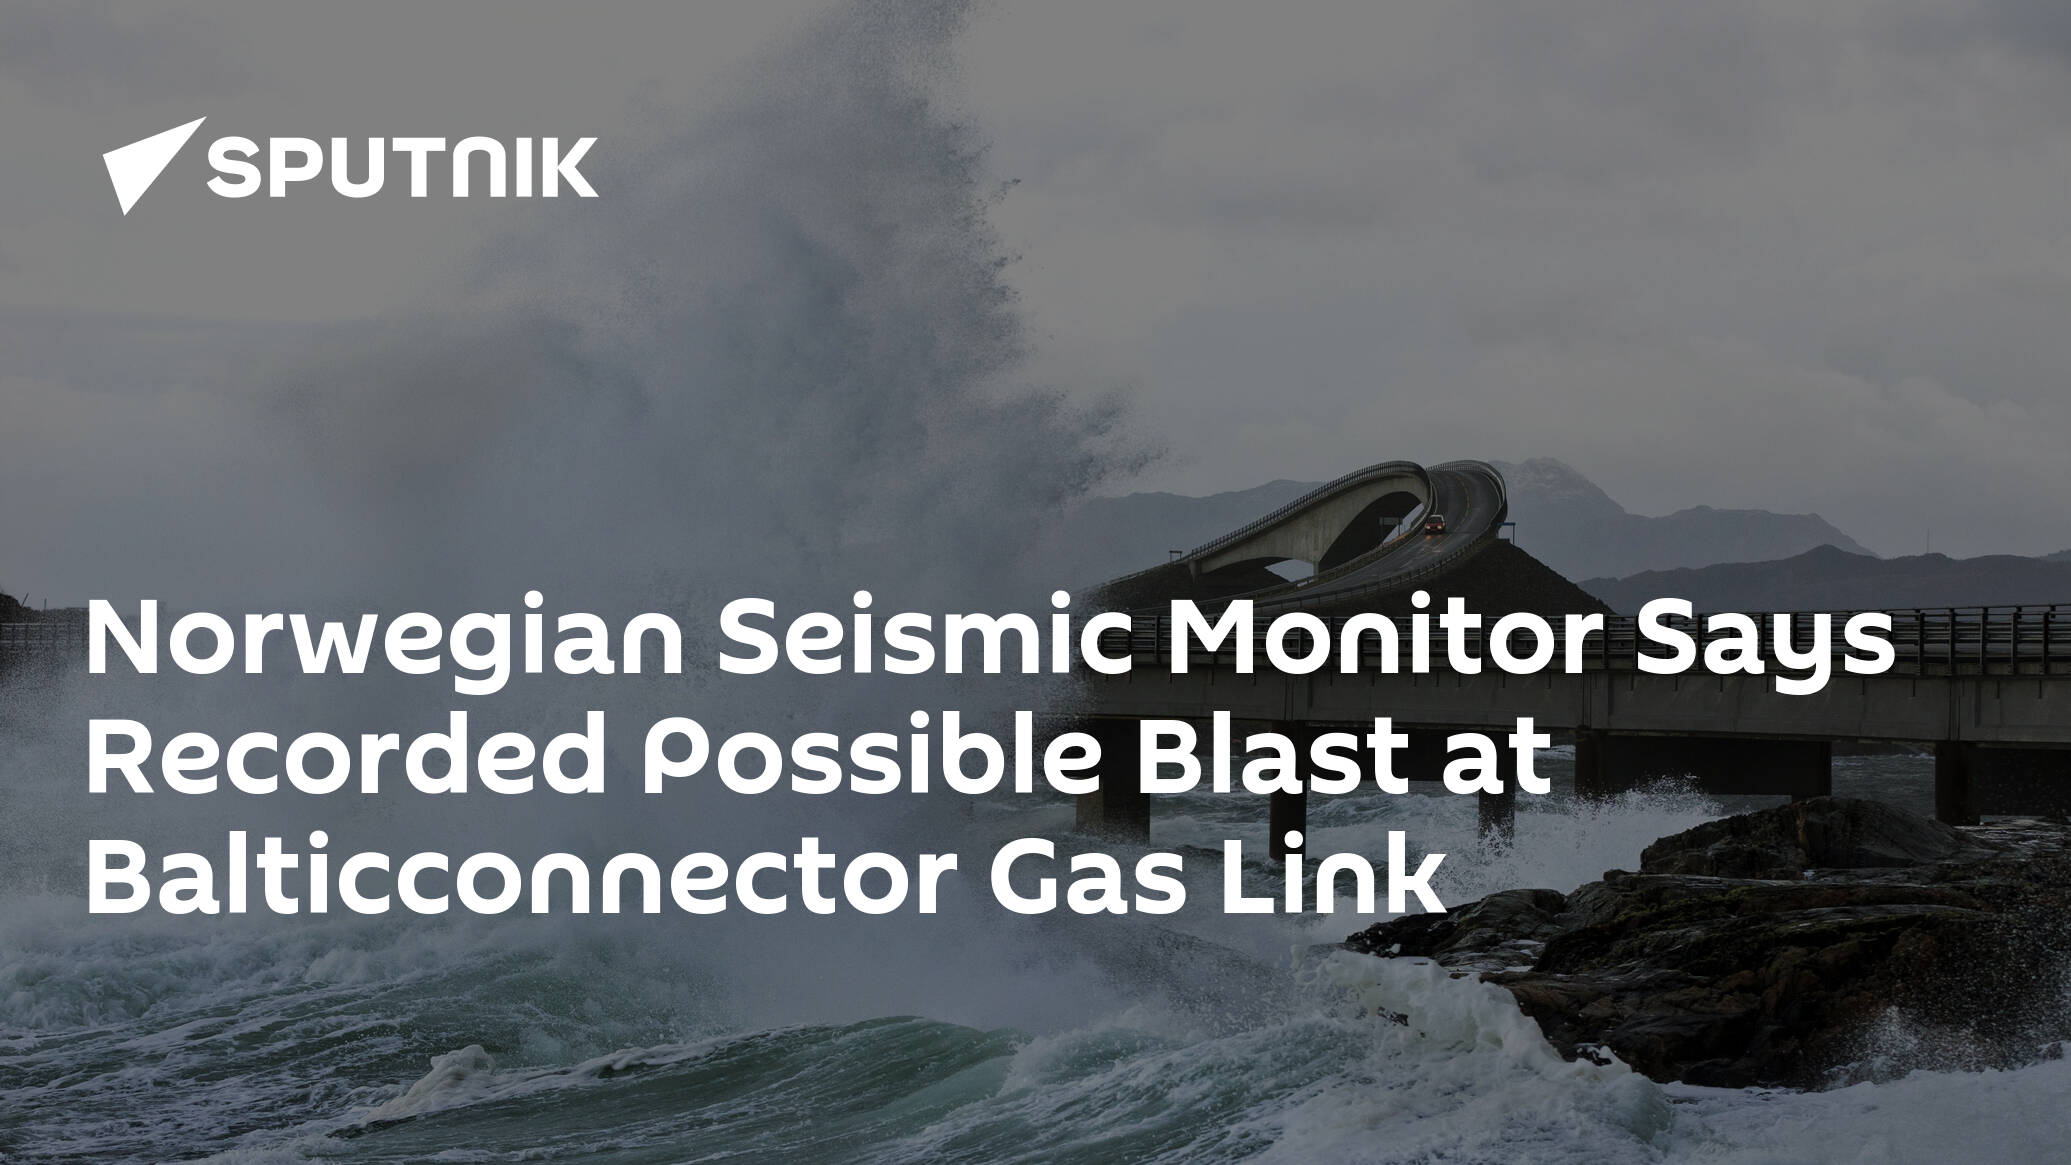 Norwegian Seismic Monitor Says Recorded Possible Blast at Balticconnector Gas Link